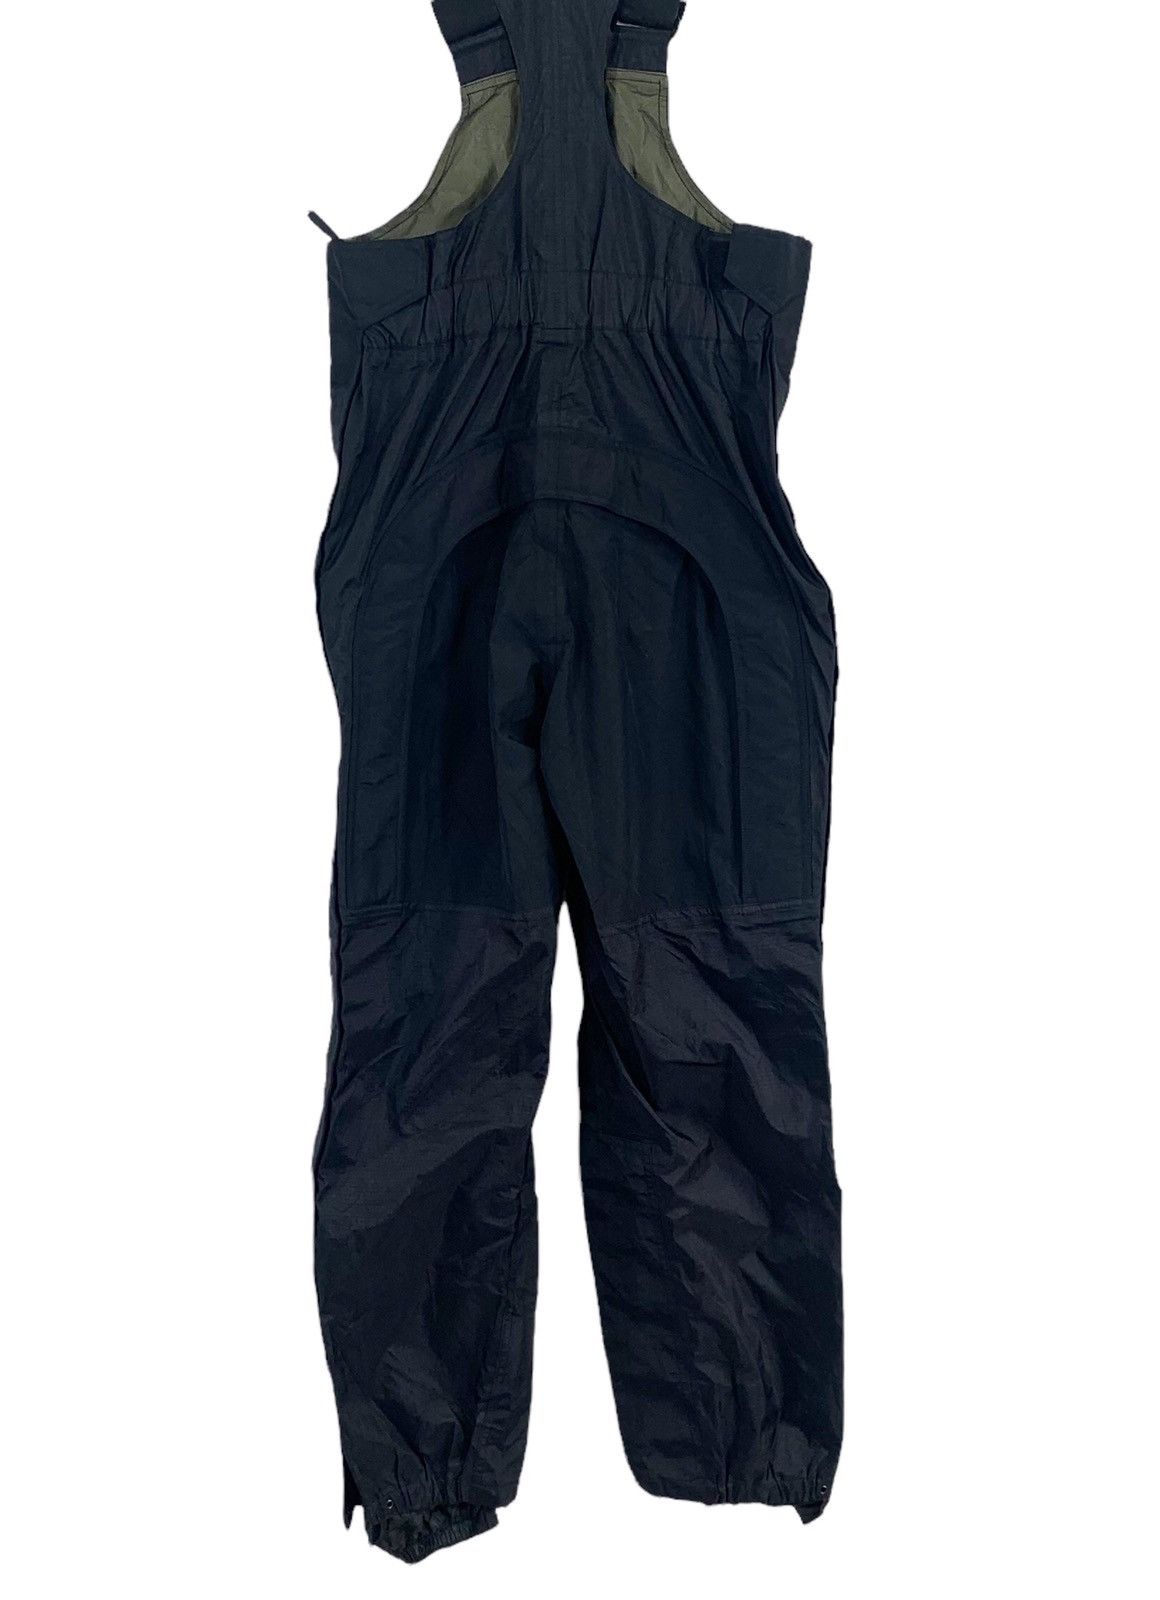 The North Face VINTAGE TNF THE NORTH FACE GORETEX OVERALL Size US 34 / EU 50 - 8 Thumbnail